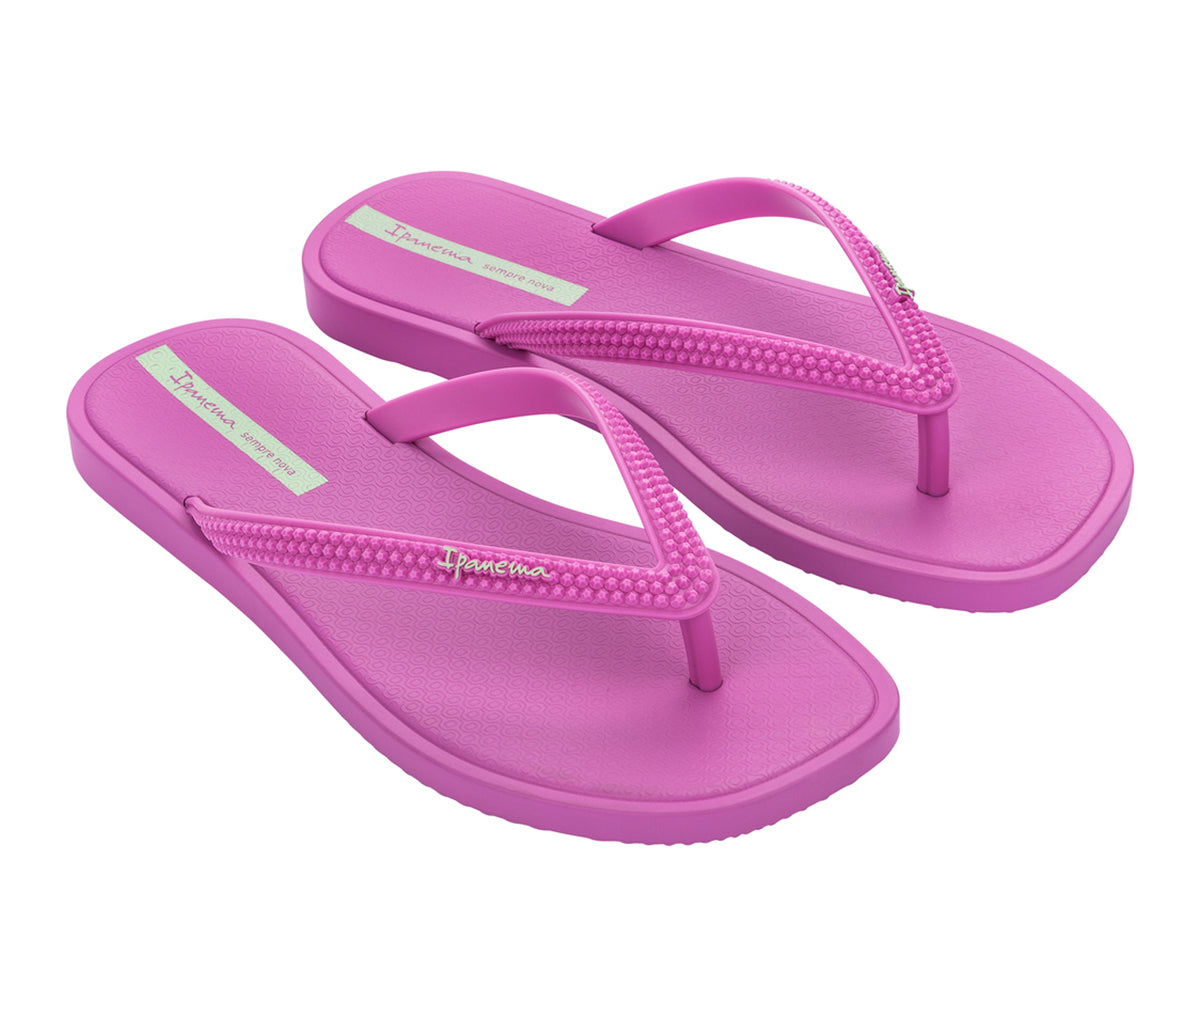 Angled view of a pair of purple Ipanema Solar flip flops.